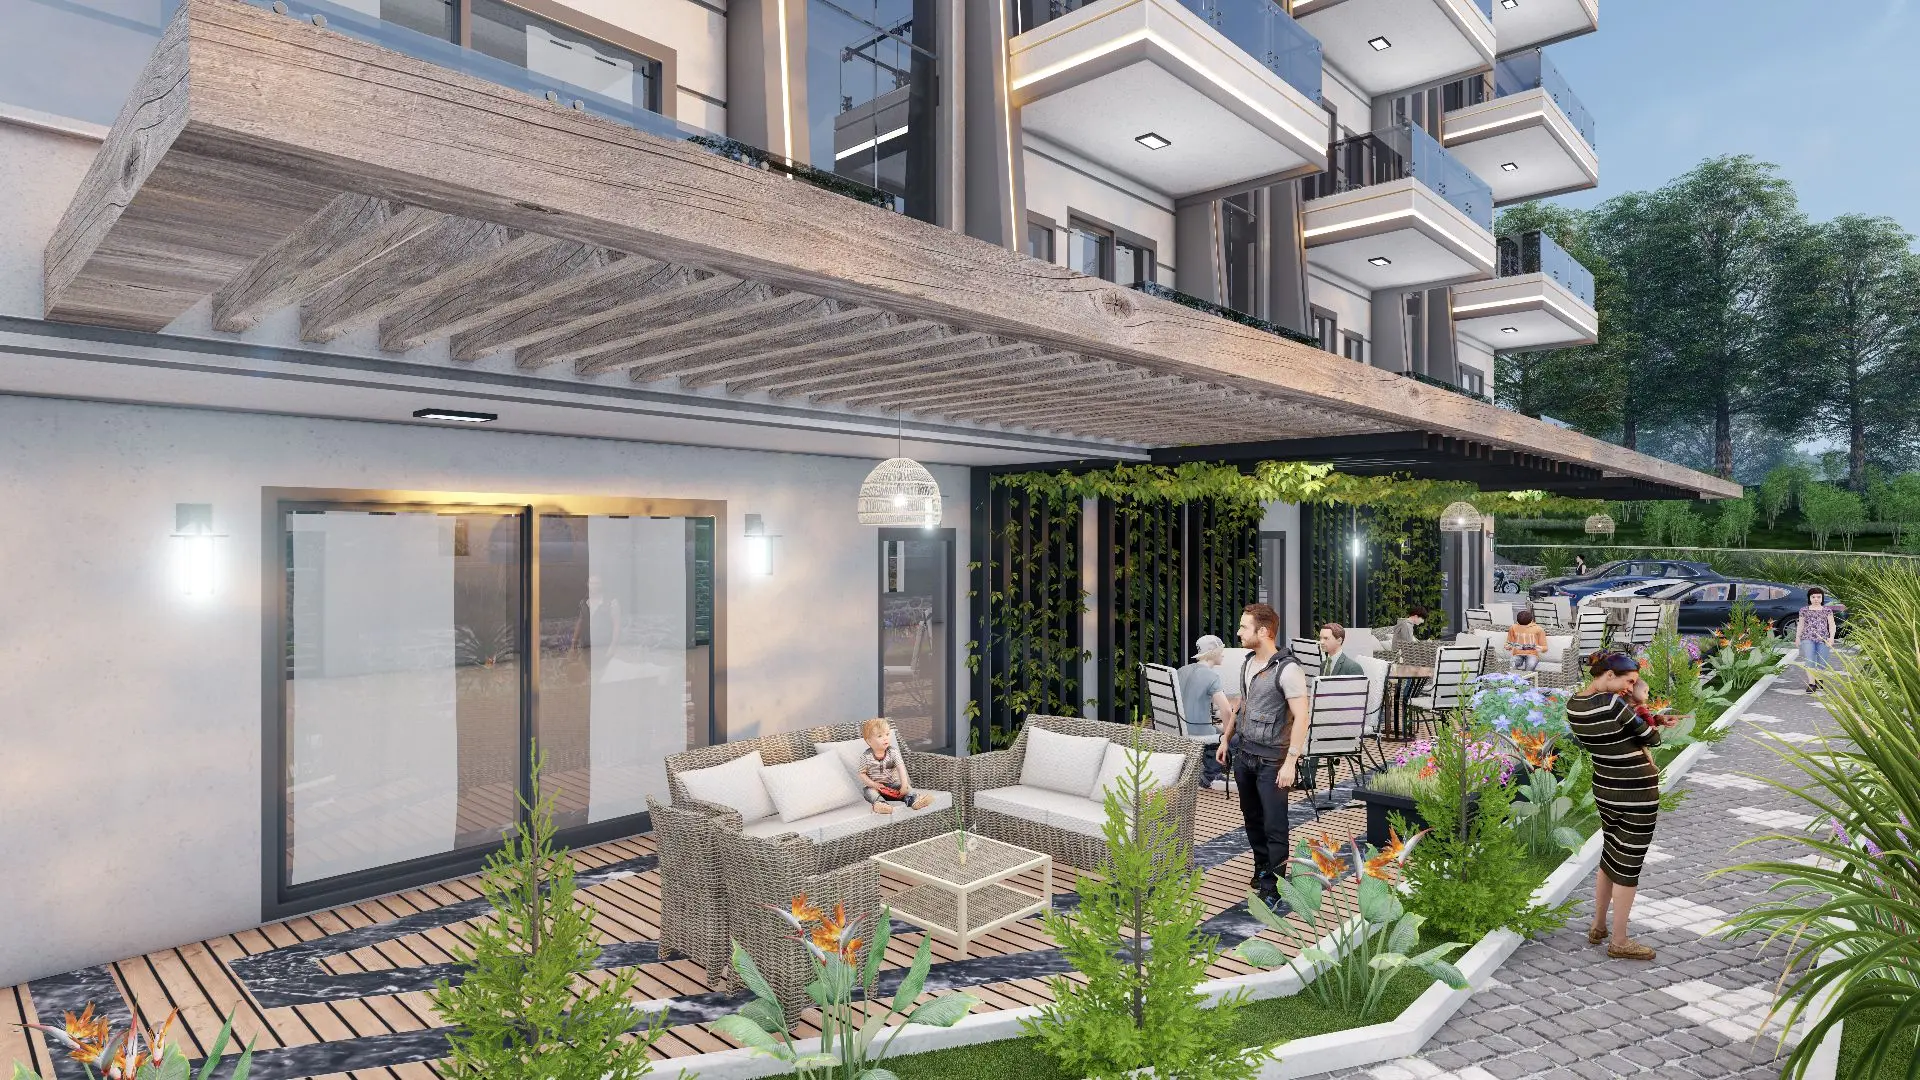 NEW BOUTIQUE HOUSING PROJECT IN DEMİRTAŞ